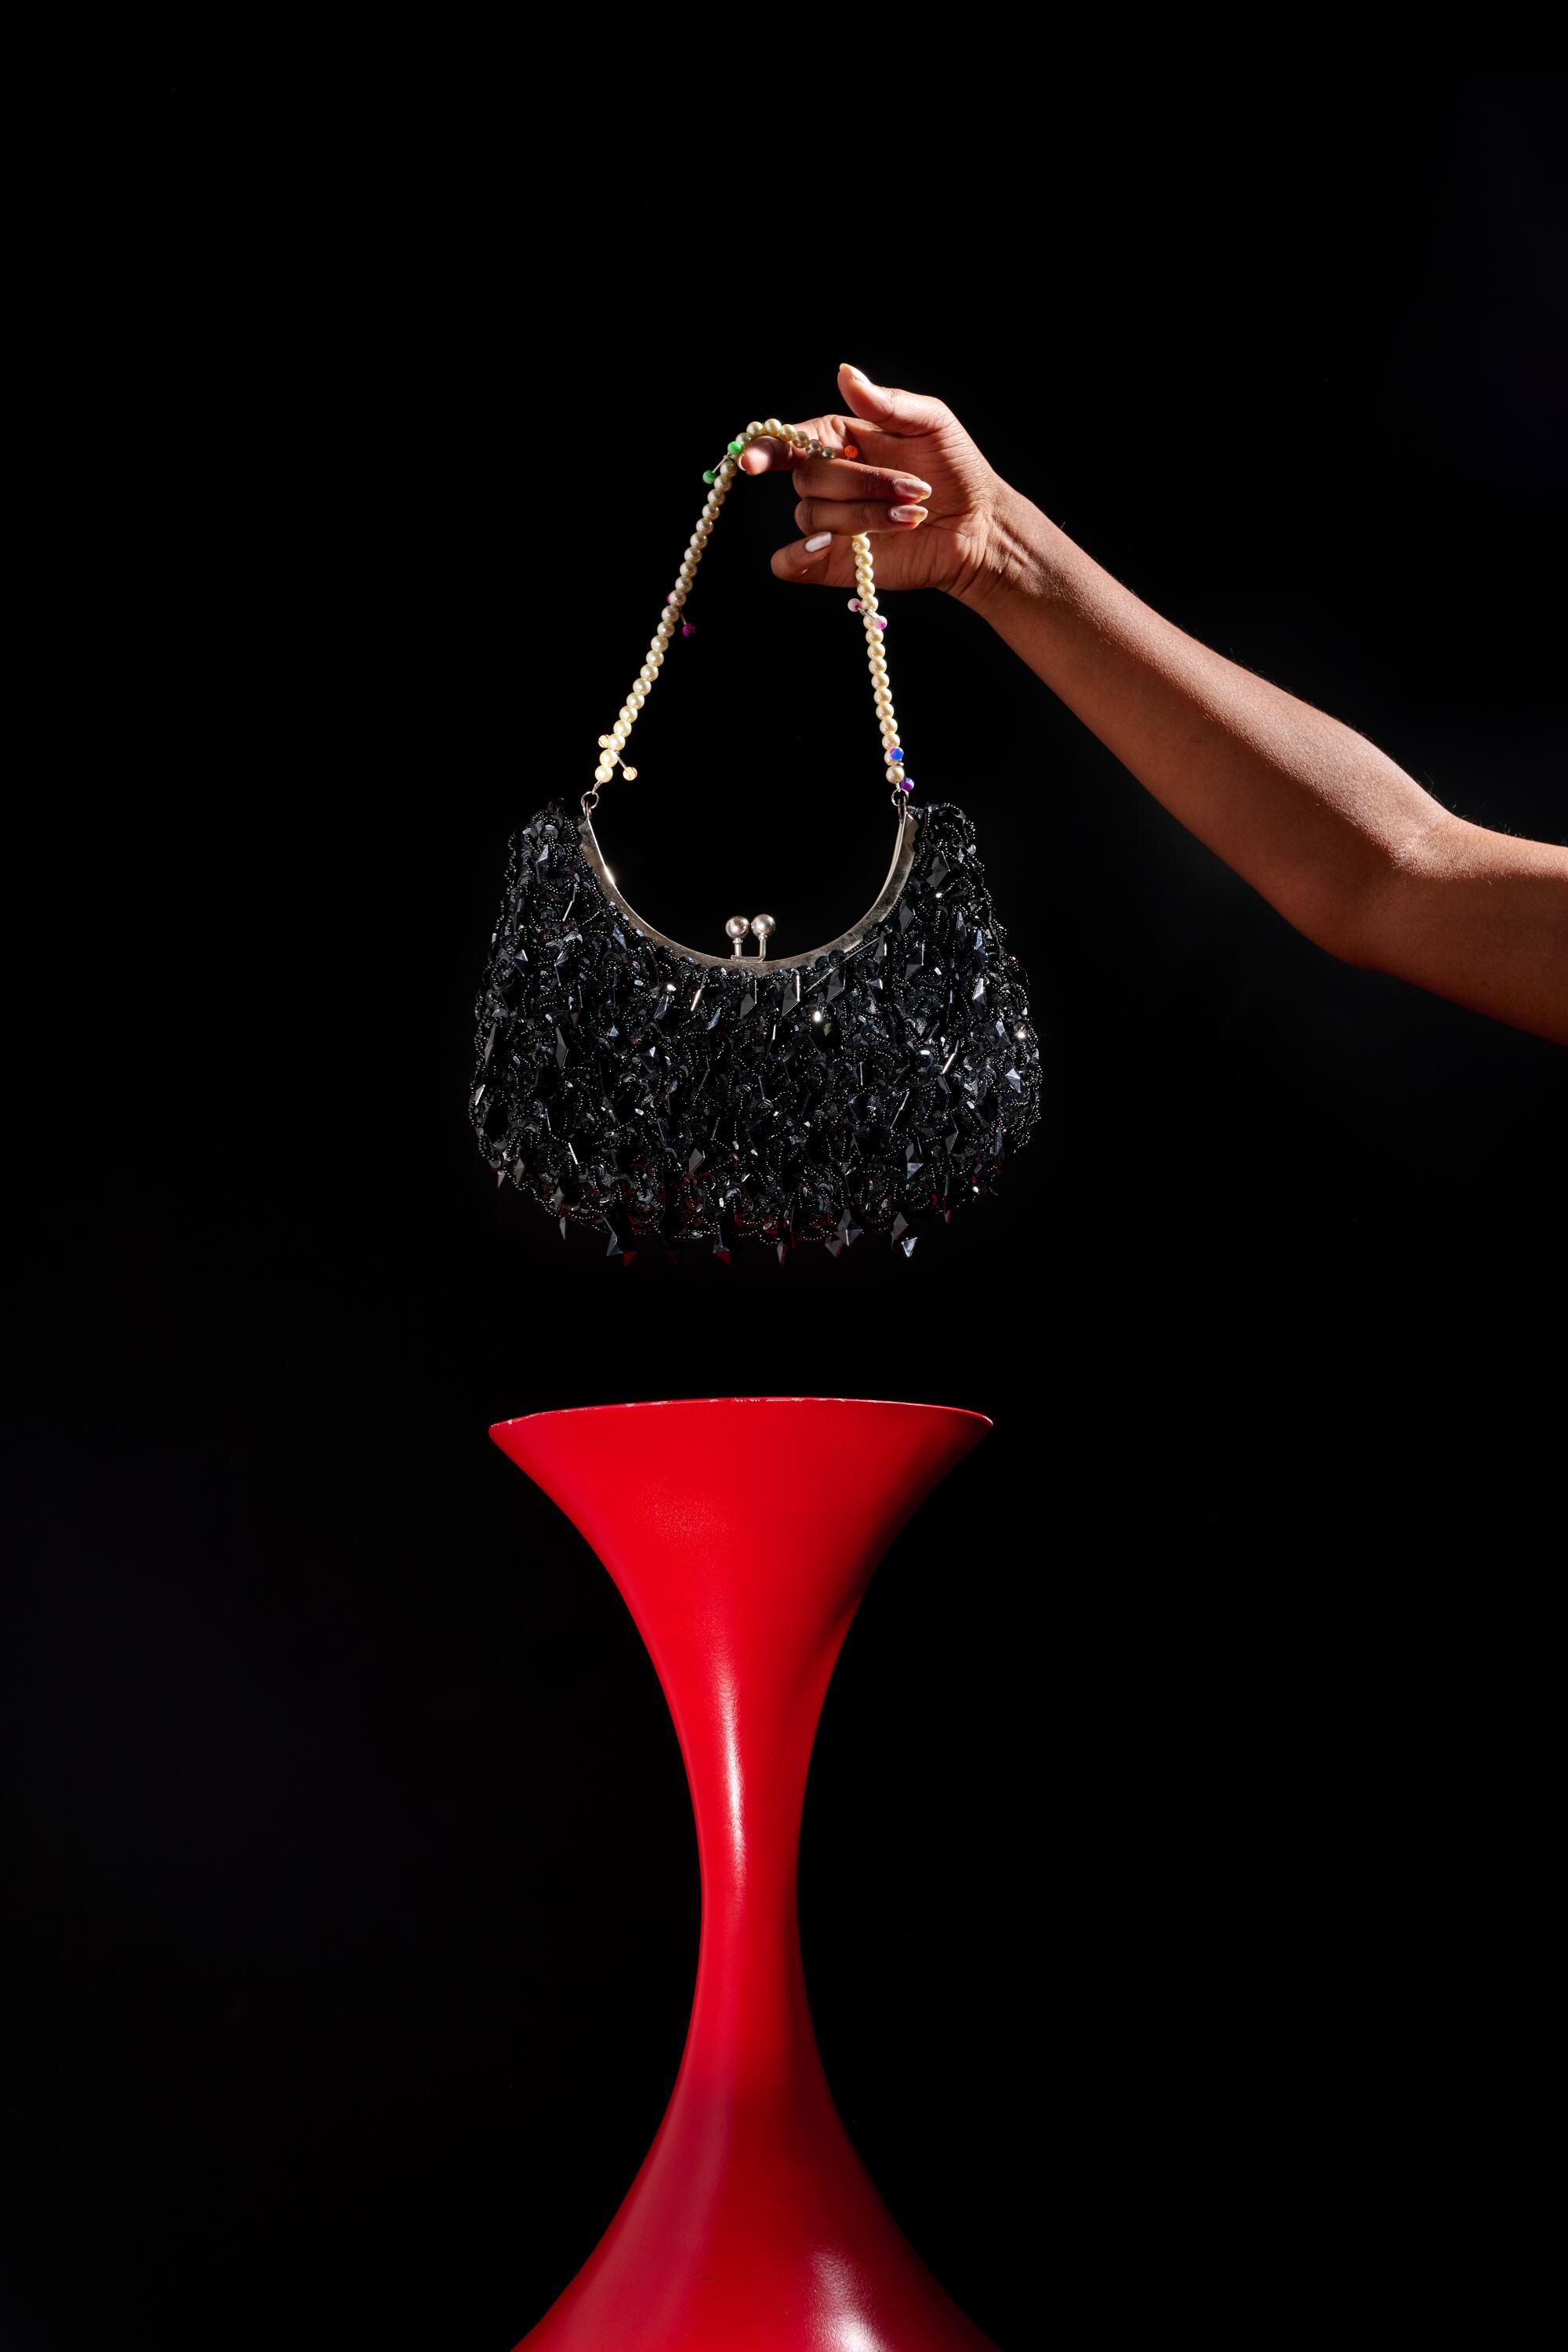 A hand holds a sparkly black purse above a red pedestal